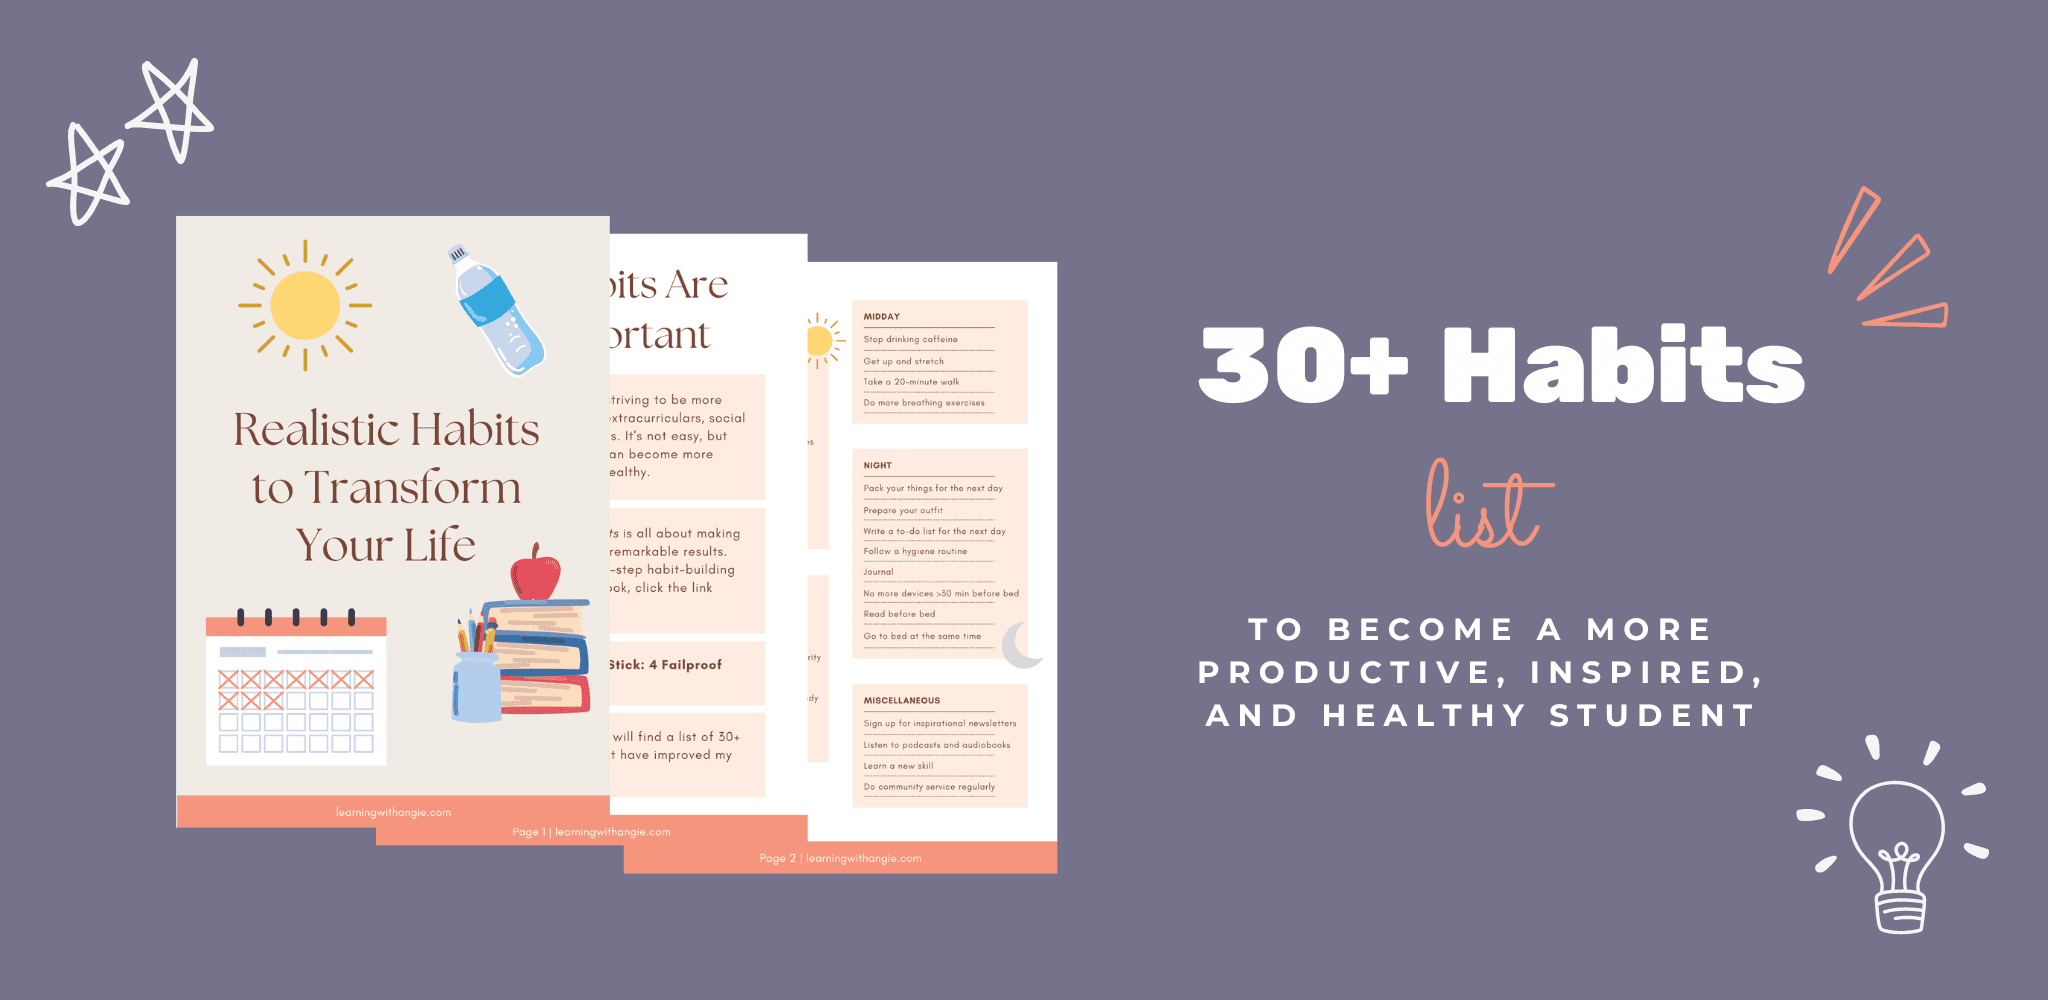 Download this list of 30+ daily habits to improve your life.